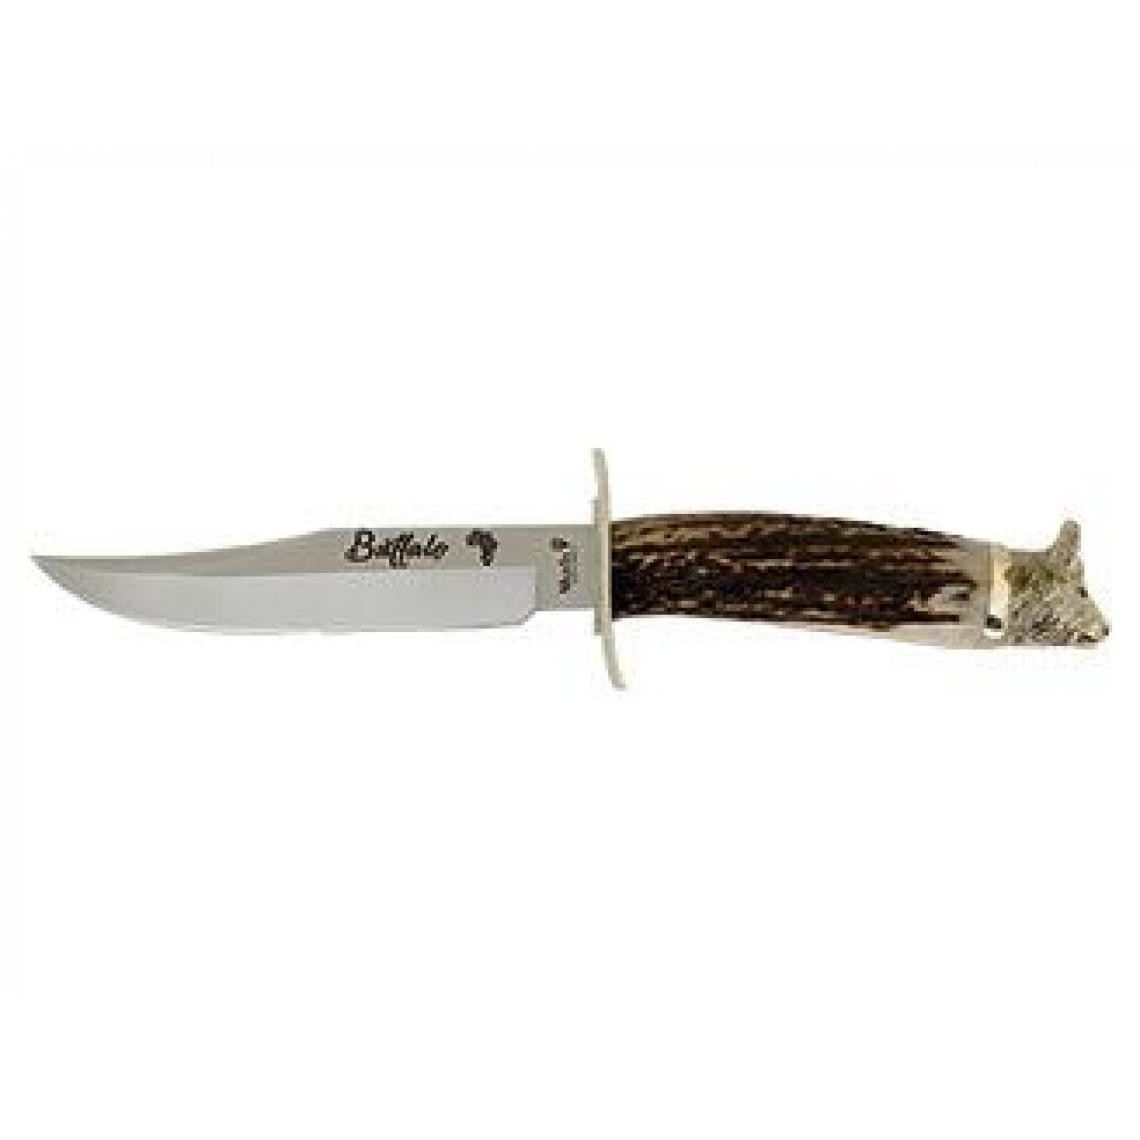 Divers Marques - Muela AFRICAN BUFFALO STAG 16BF - Outils de coupe